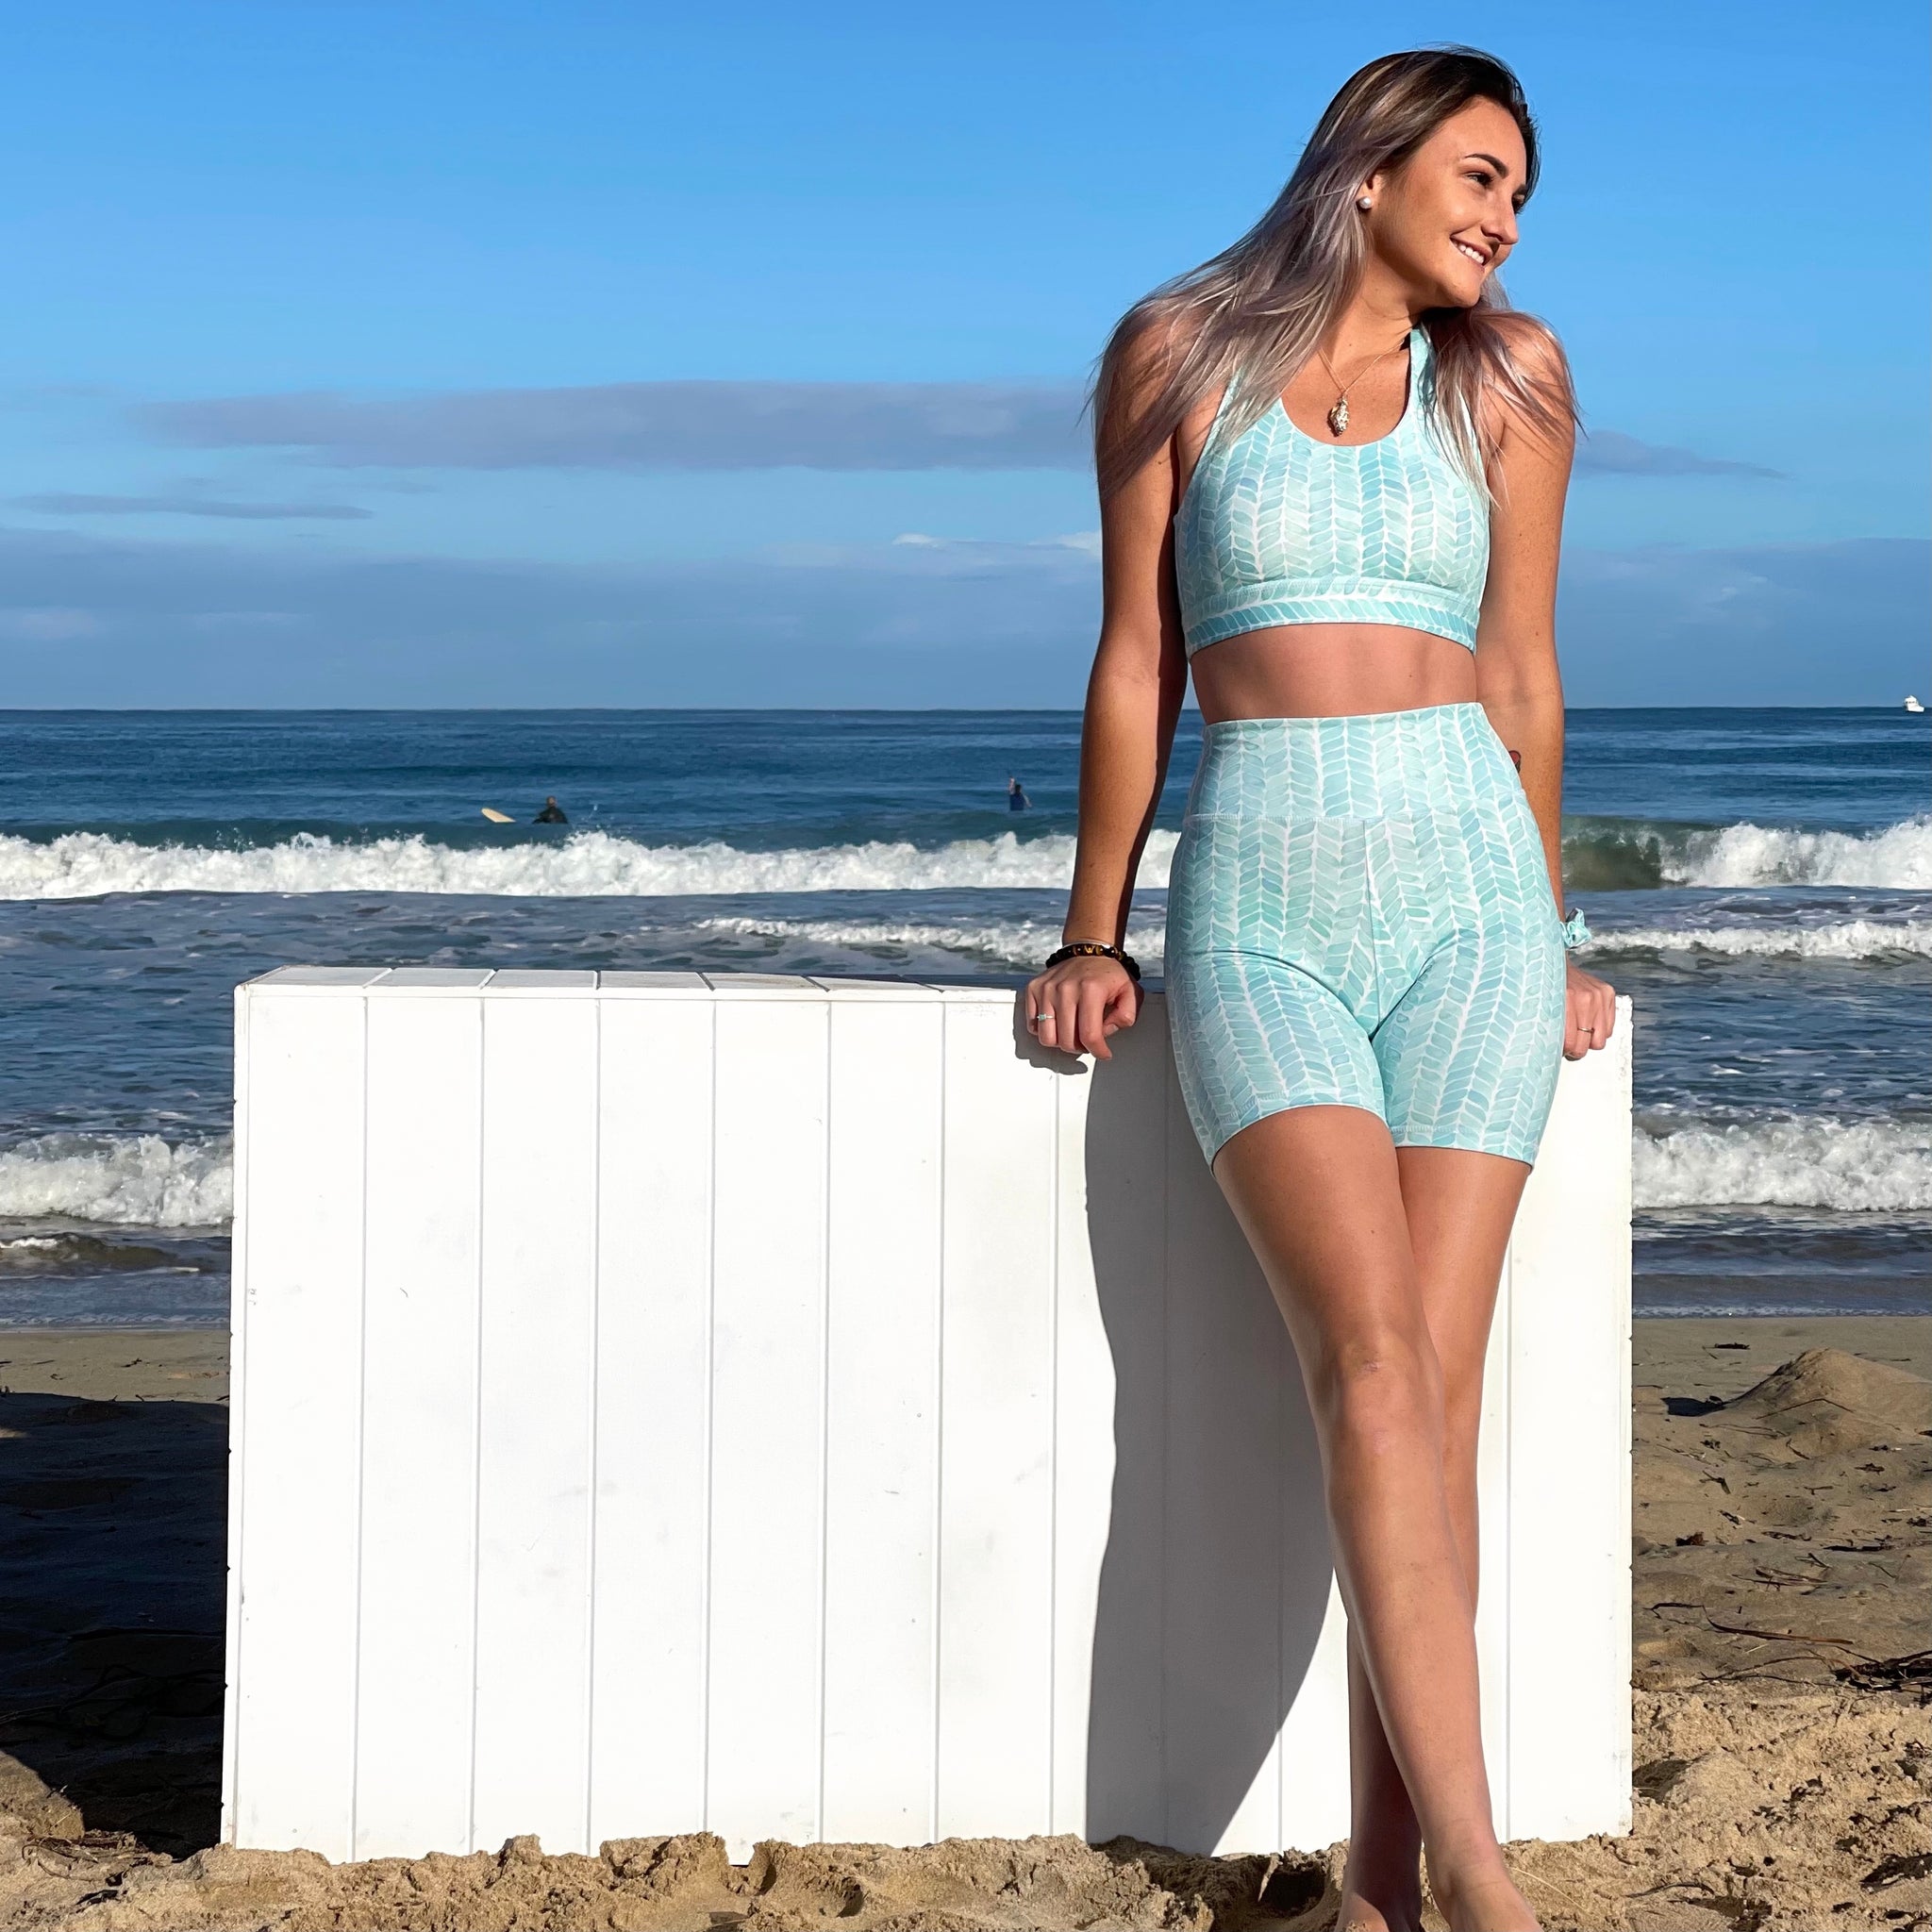 Australian ethical and sustainable activewear matching set made from recycled plastic materials. Aqua mint patterned sports bra.